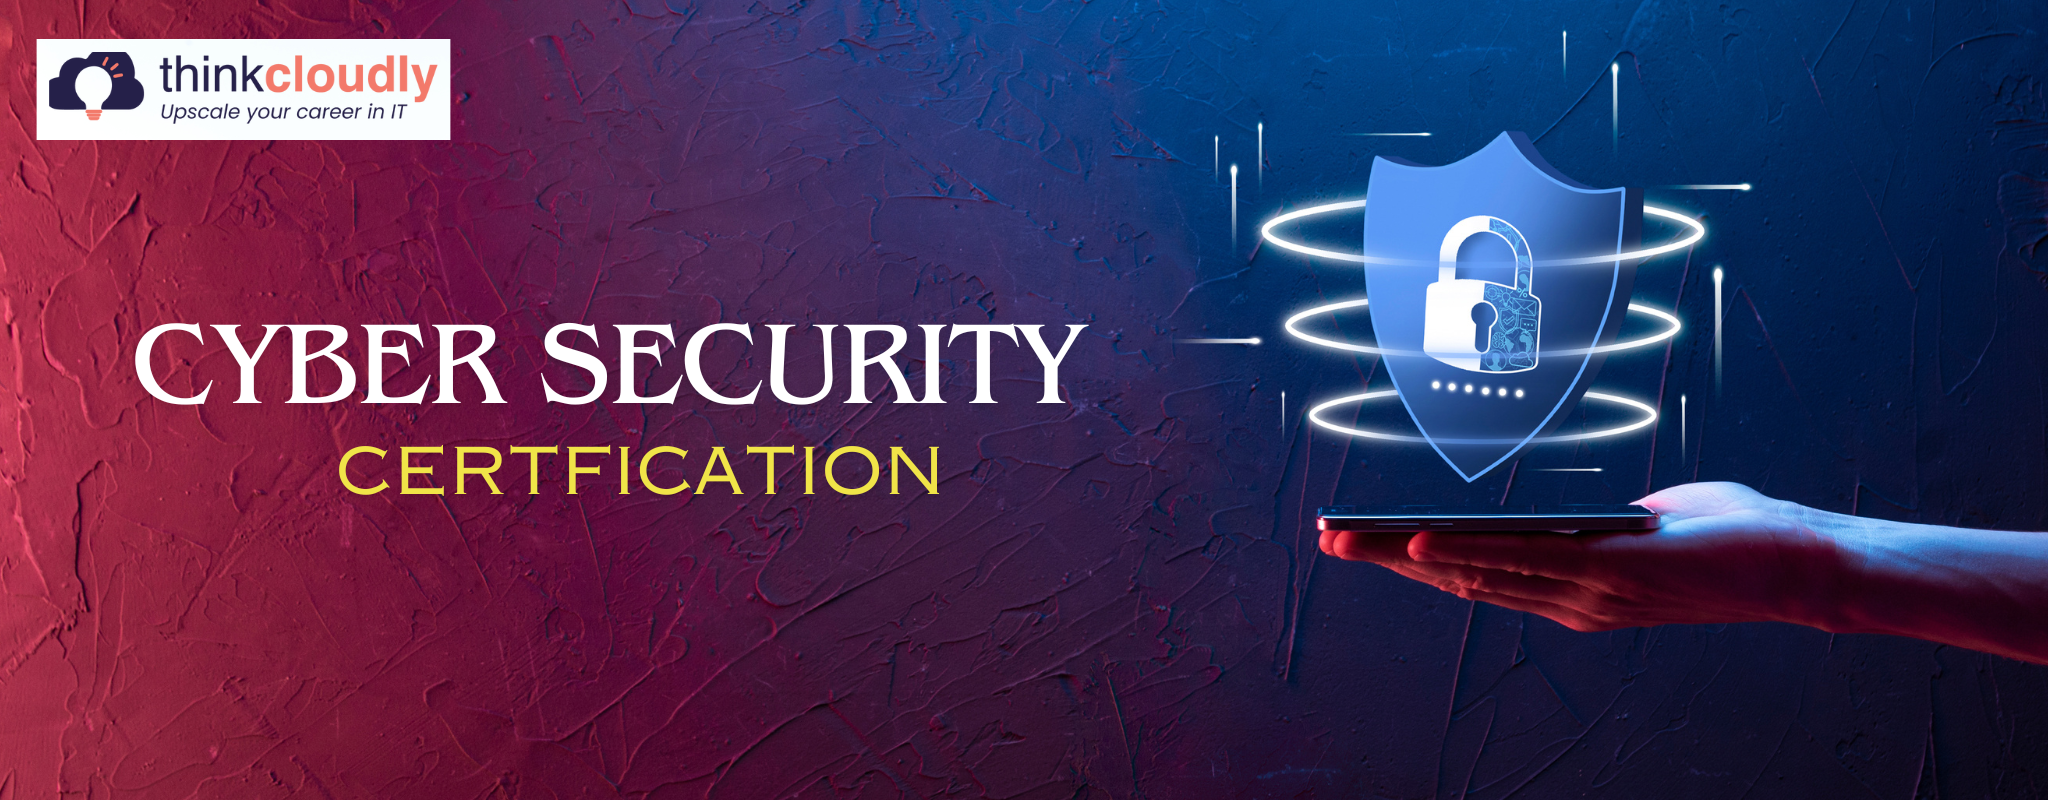 Cyber-Security-Certification-Think-Cloudly